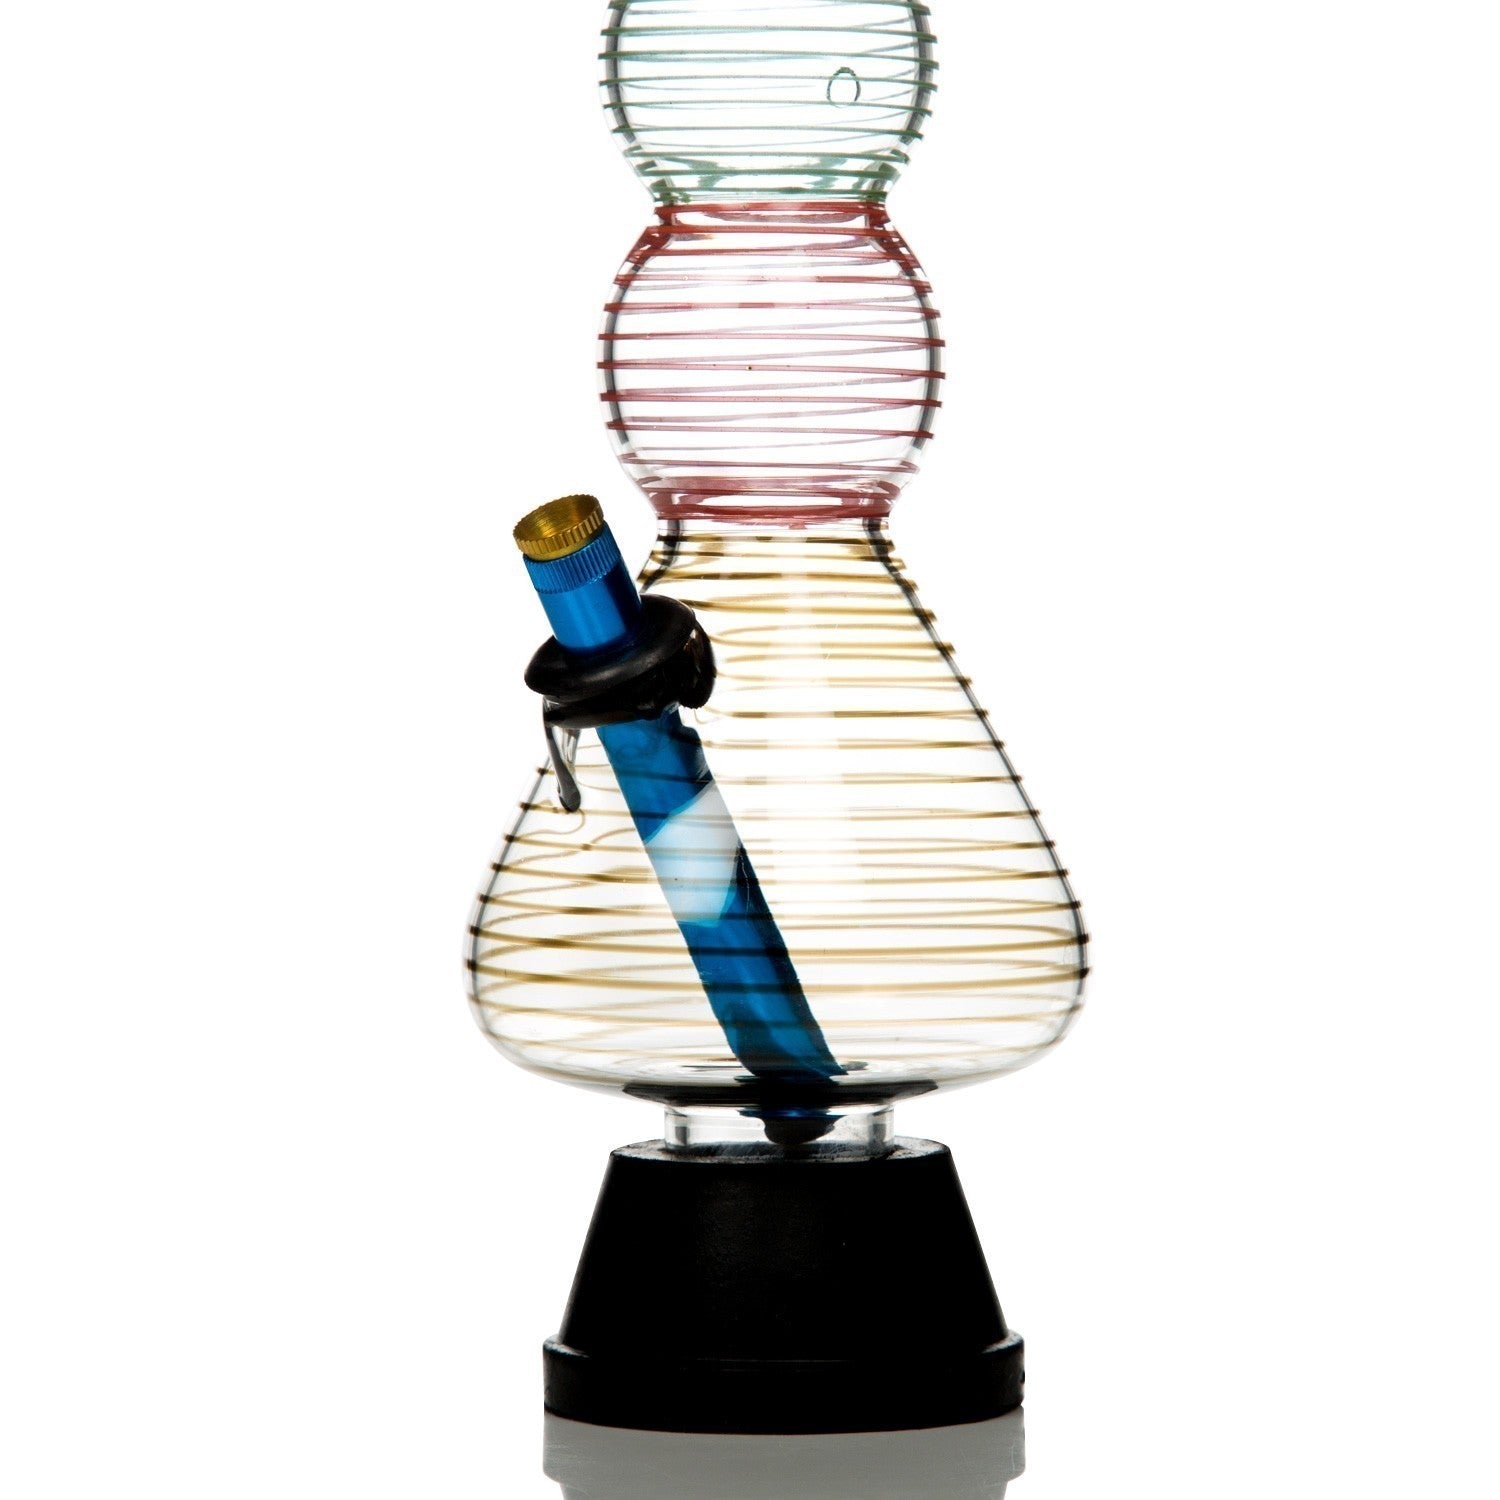 Agung bong with bonza stem and cone piece and multiple stripes.